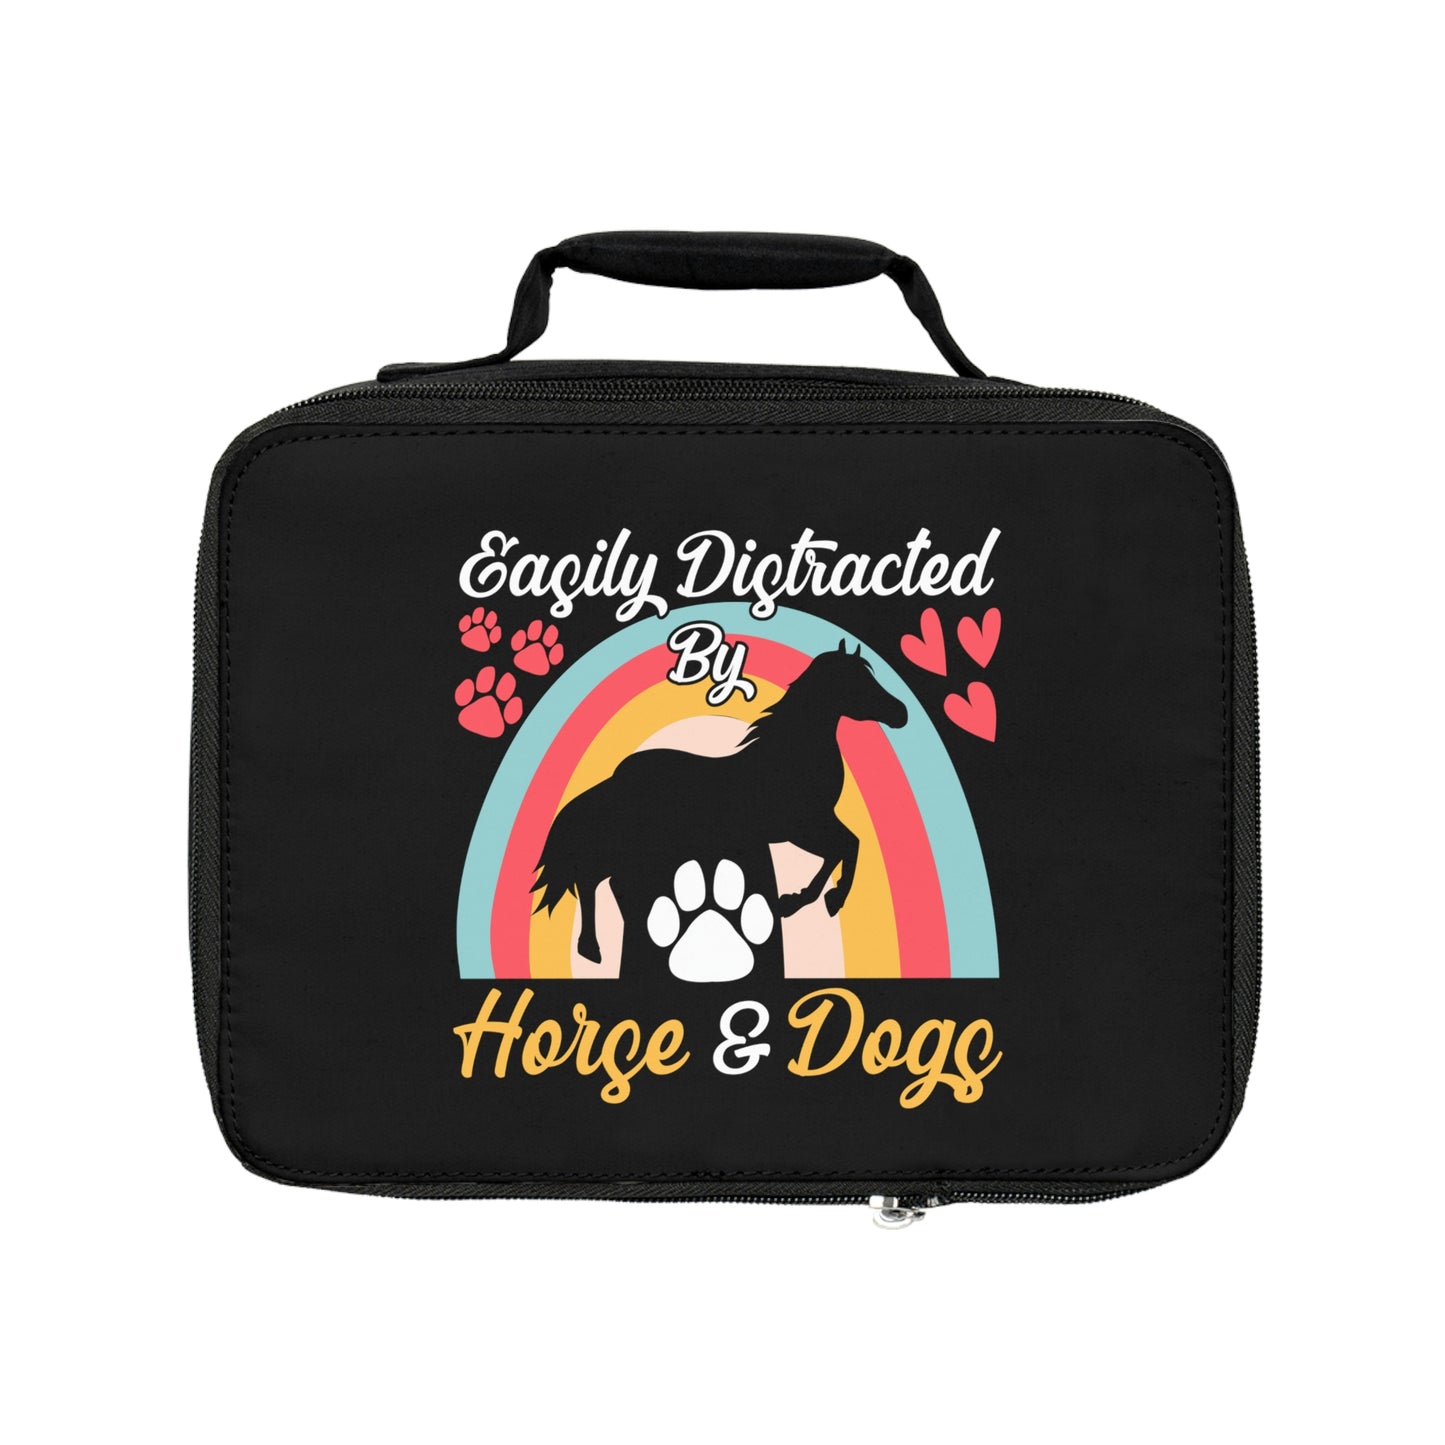 Easily Distracted by Horse & Dogs Lunch Bag